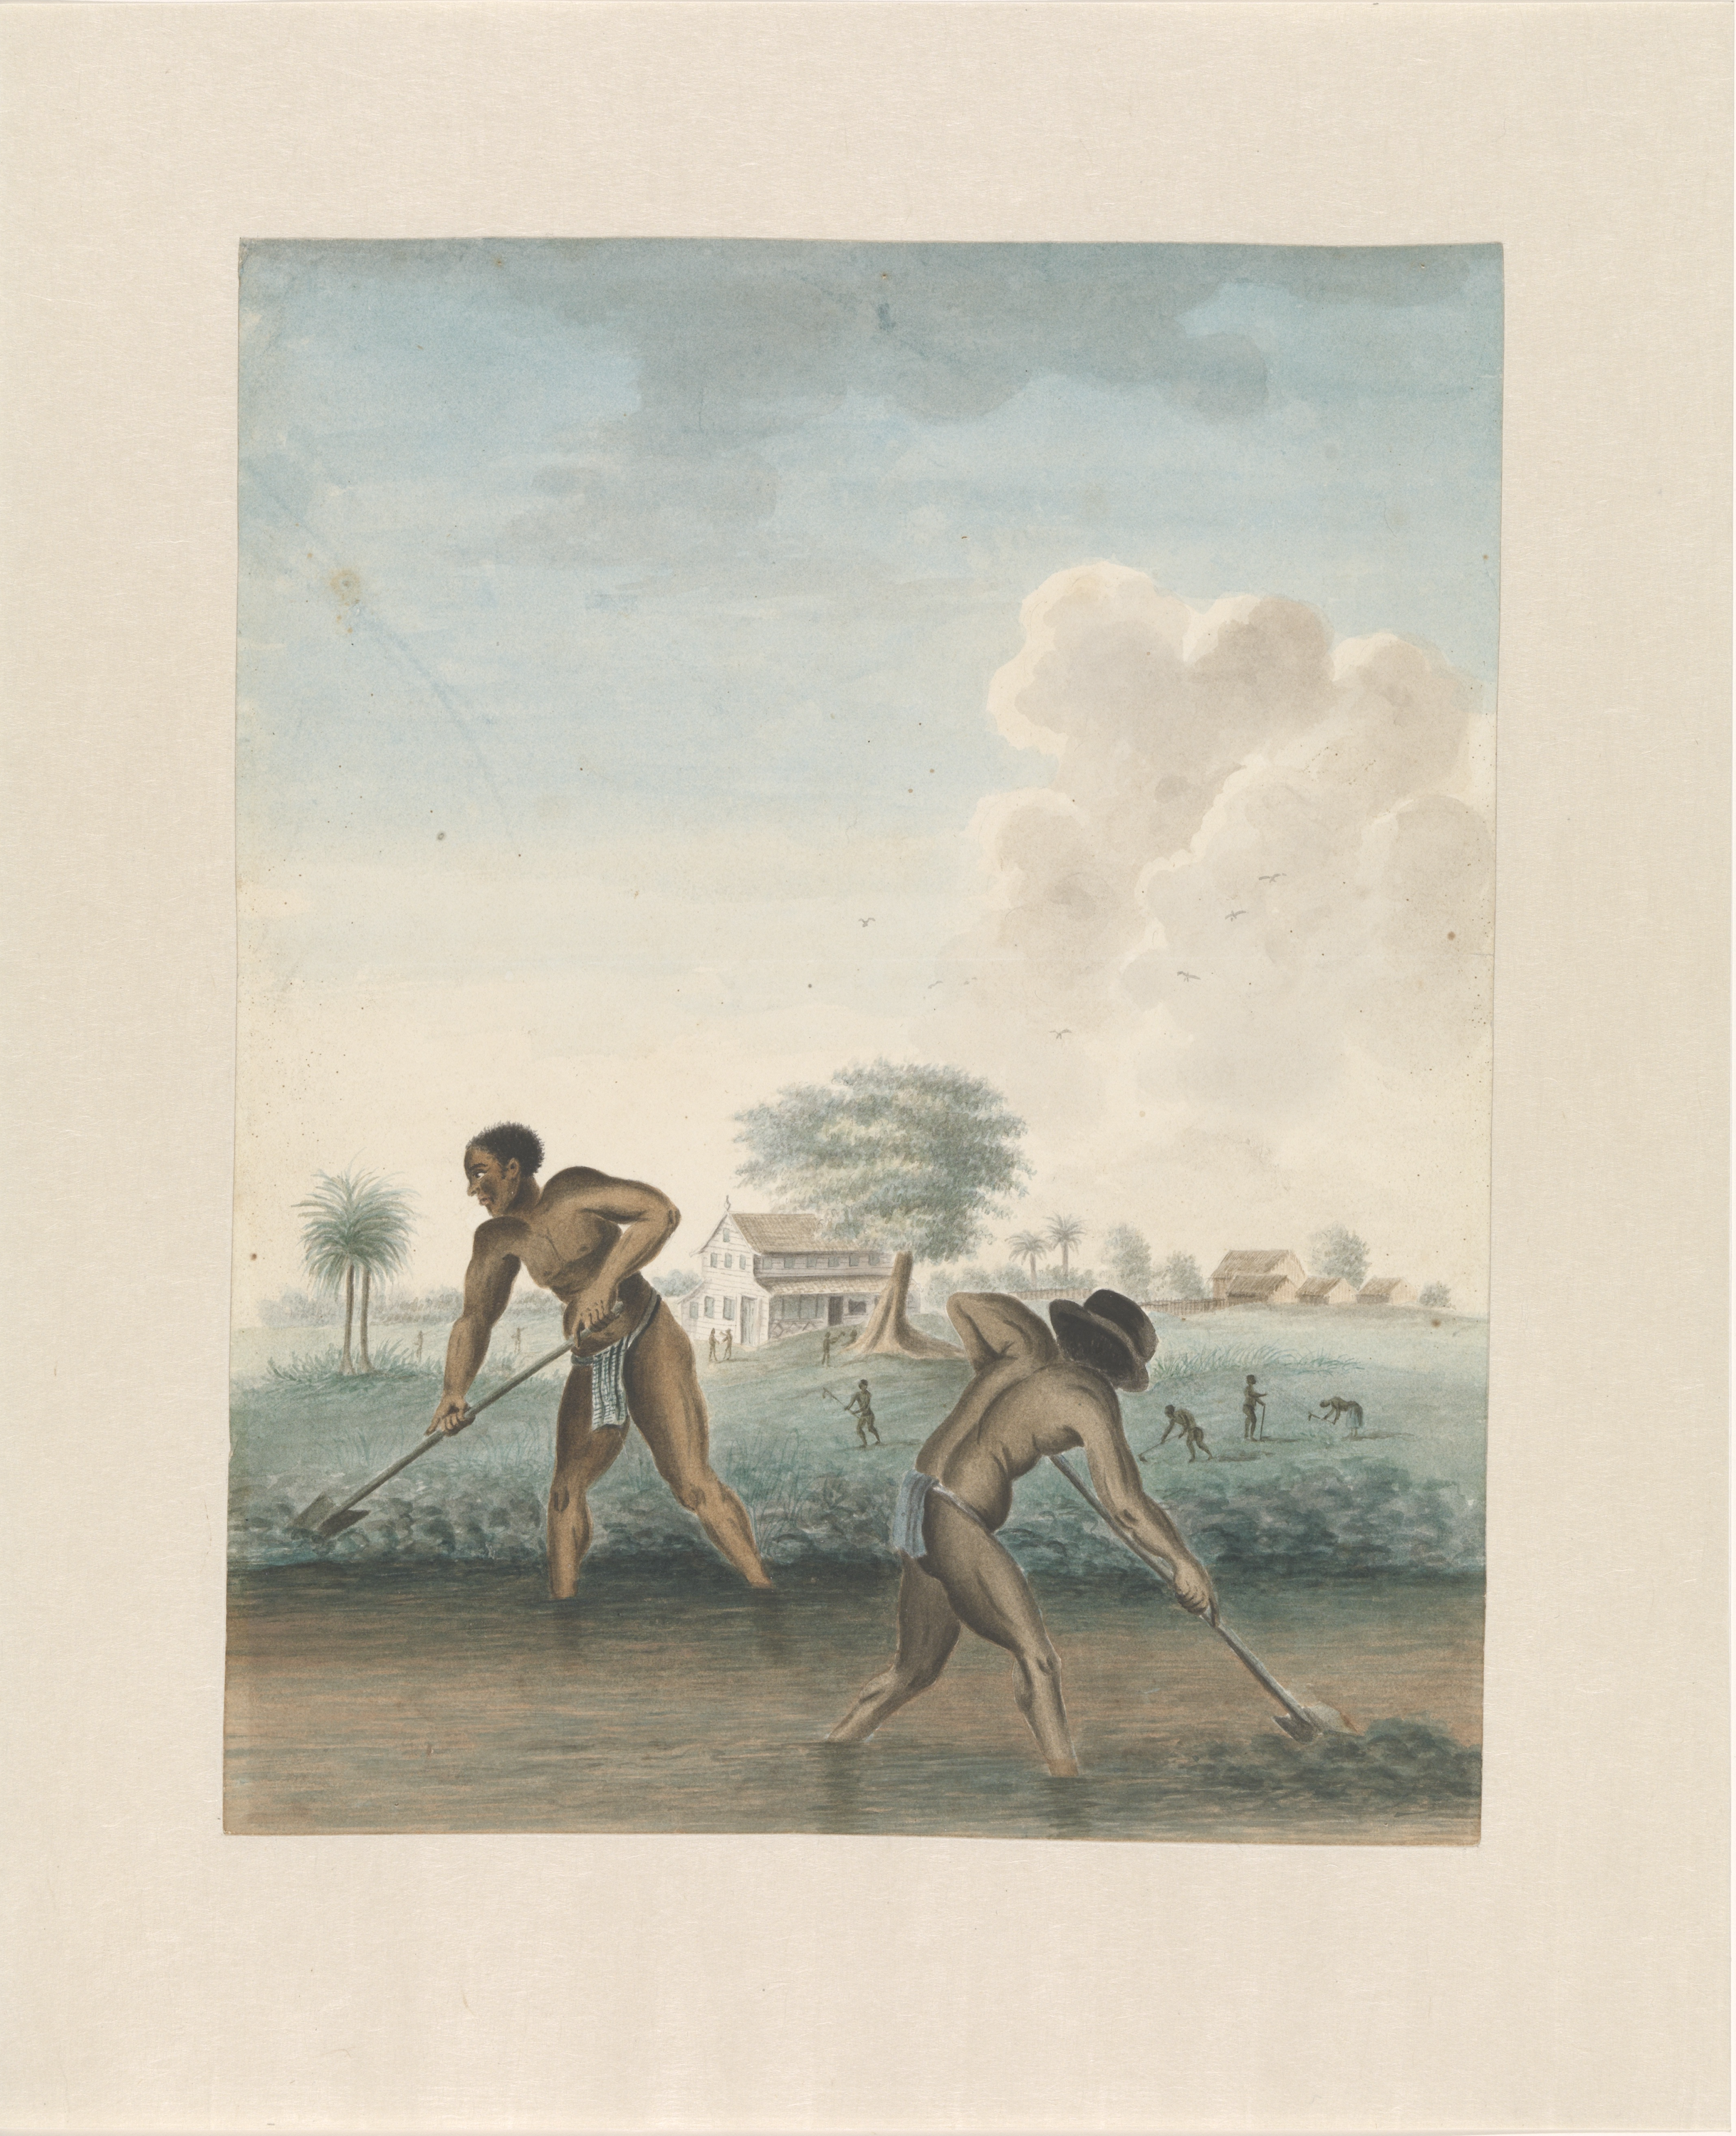 Enslaved men digging trenches by Unknown Artist - c. 1850 - 32.5 cm × 25.4 cm Rijksmuseum